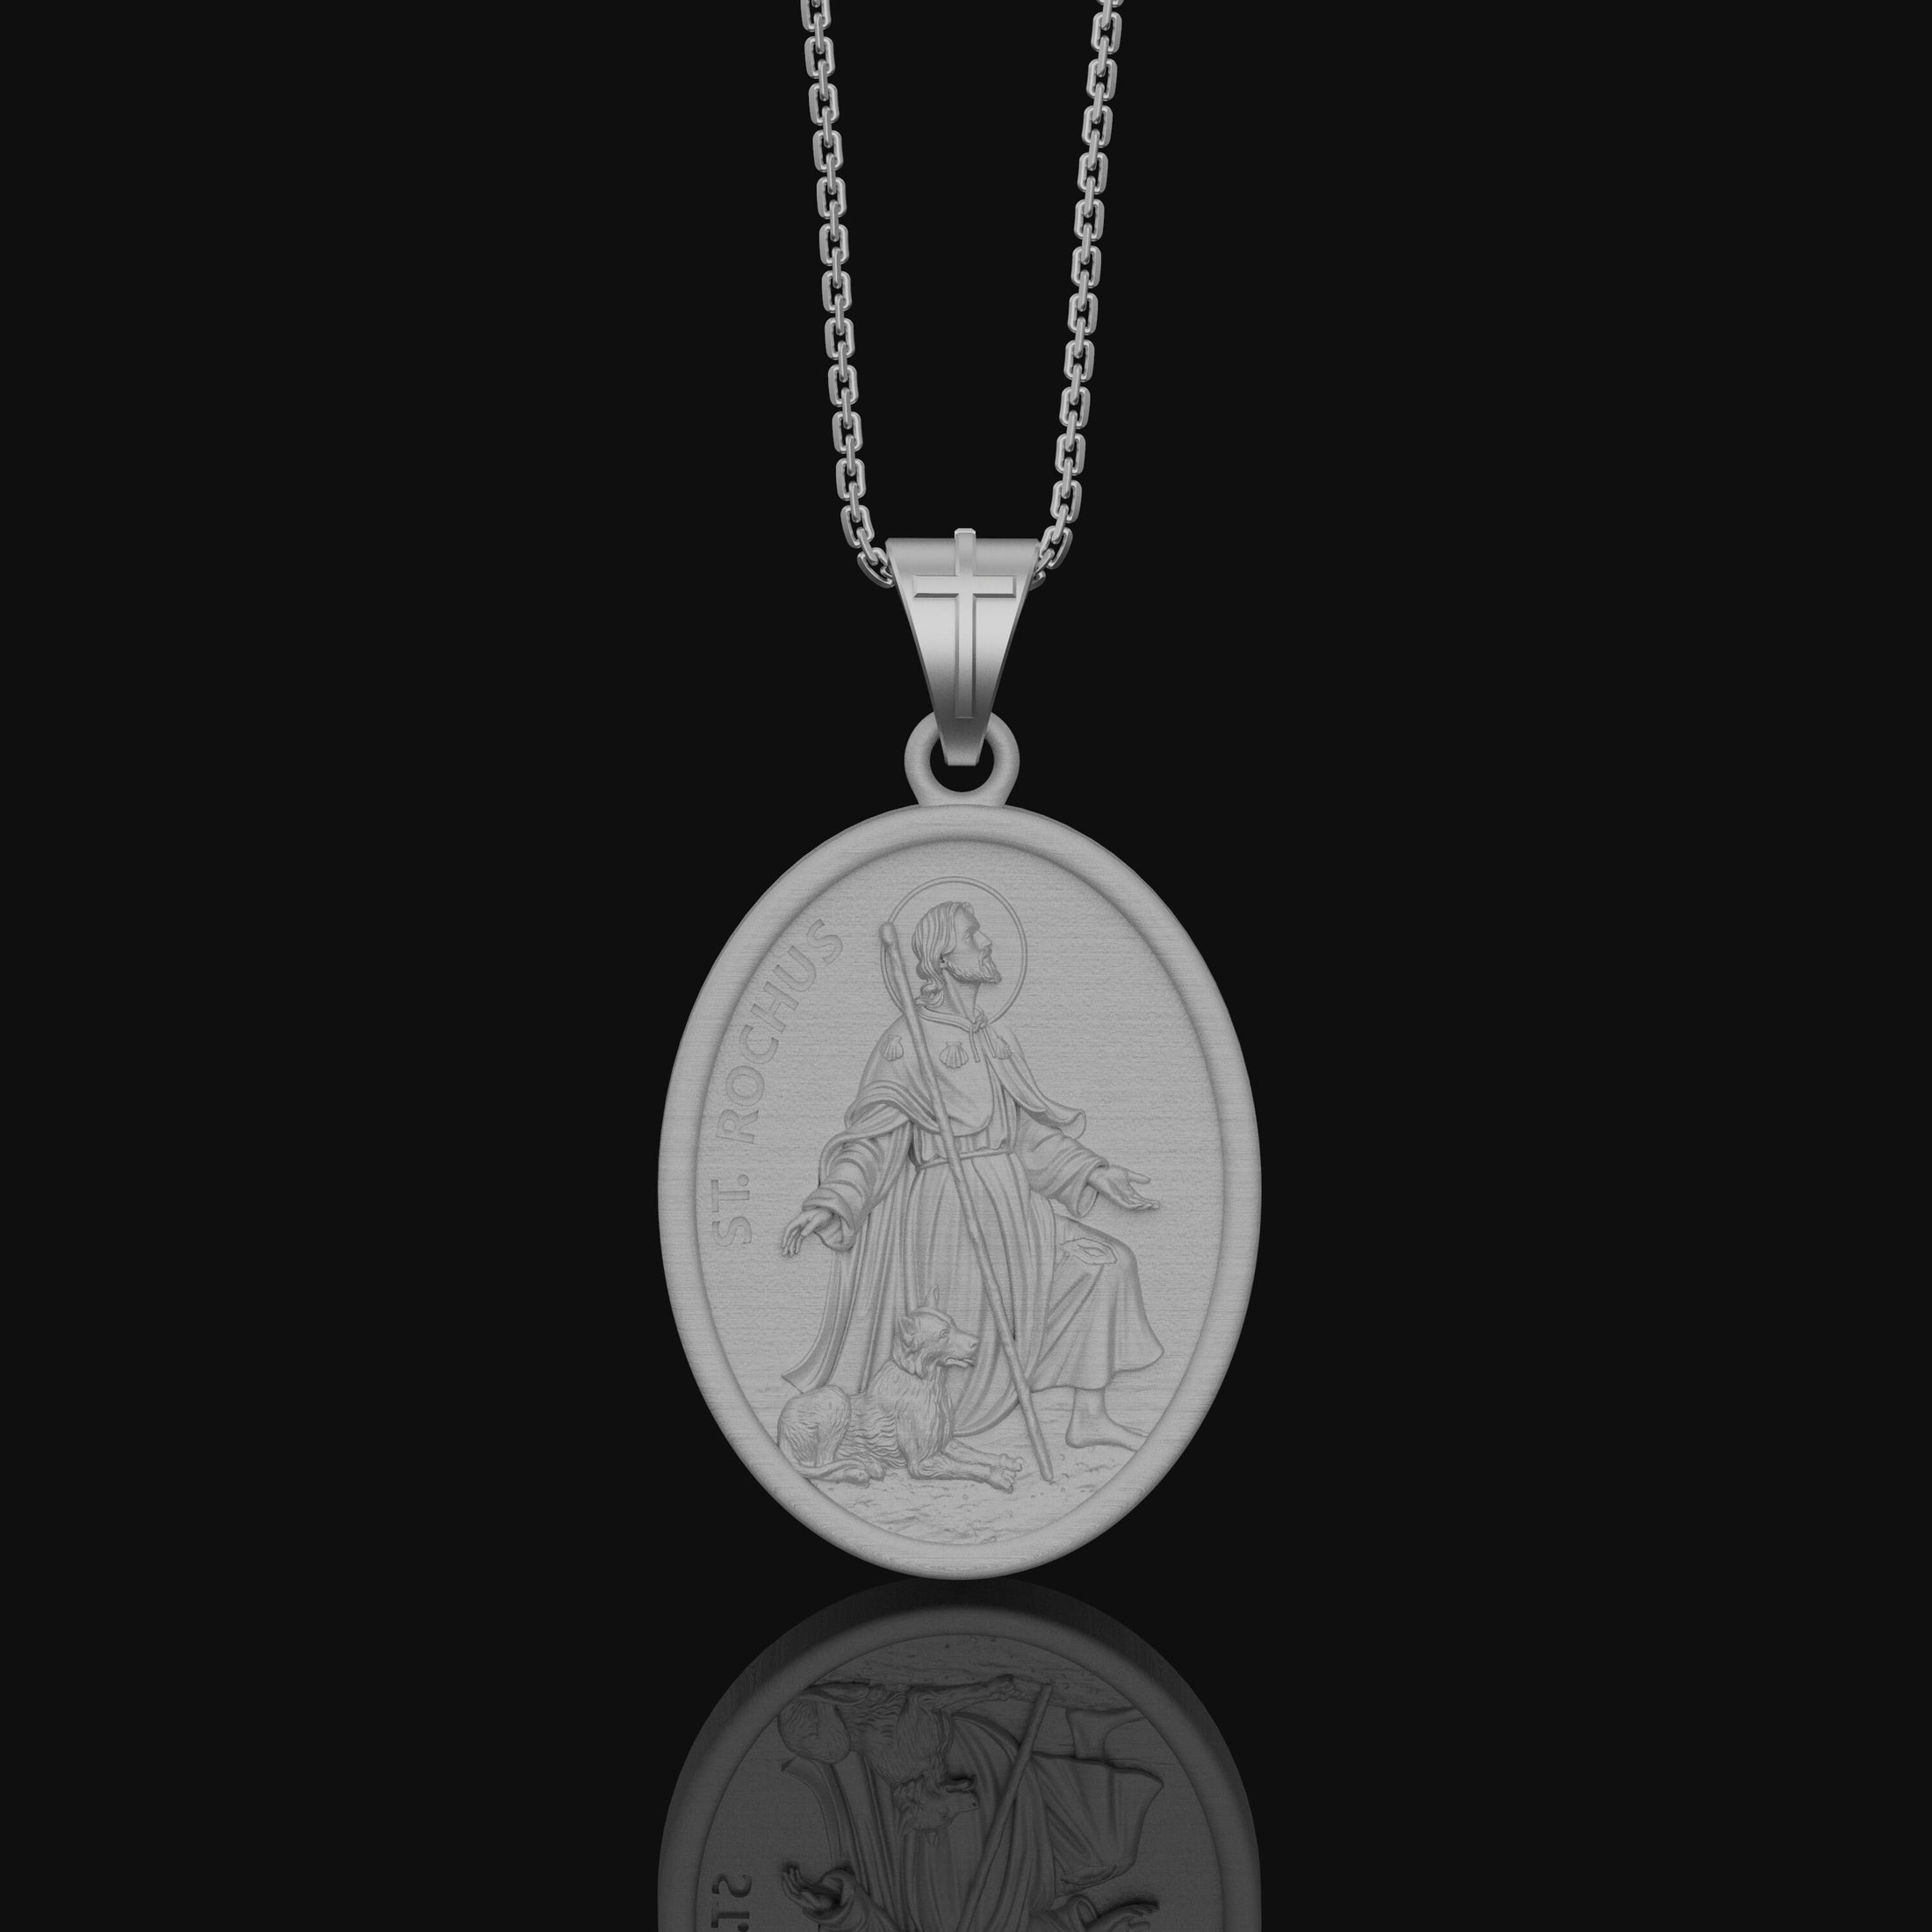 Saint Rochus Necklace, Dog Protection, Christmas Gift, Personalized Gift, Silver Medallion, Christian Jewelry, Vintage Religious Necklace Polished Matte